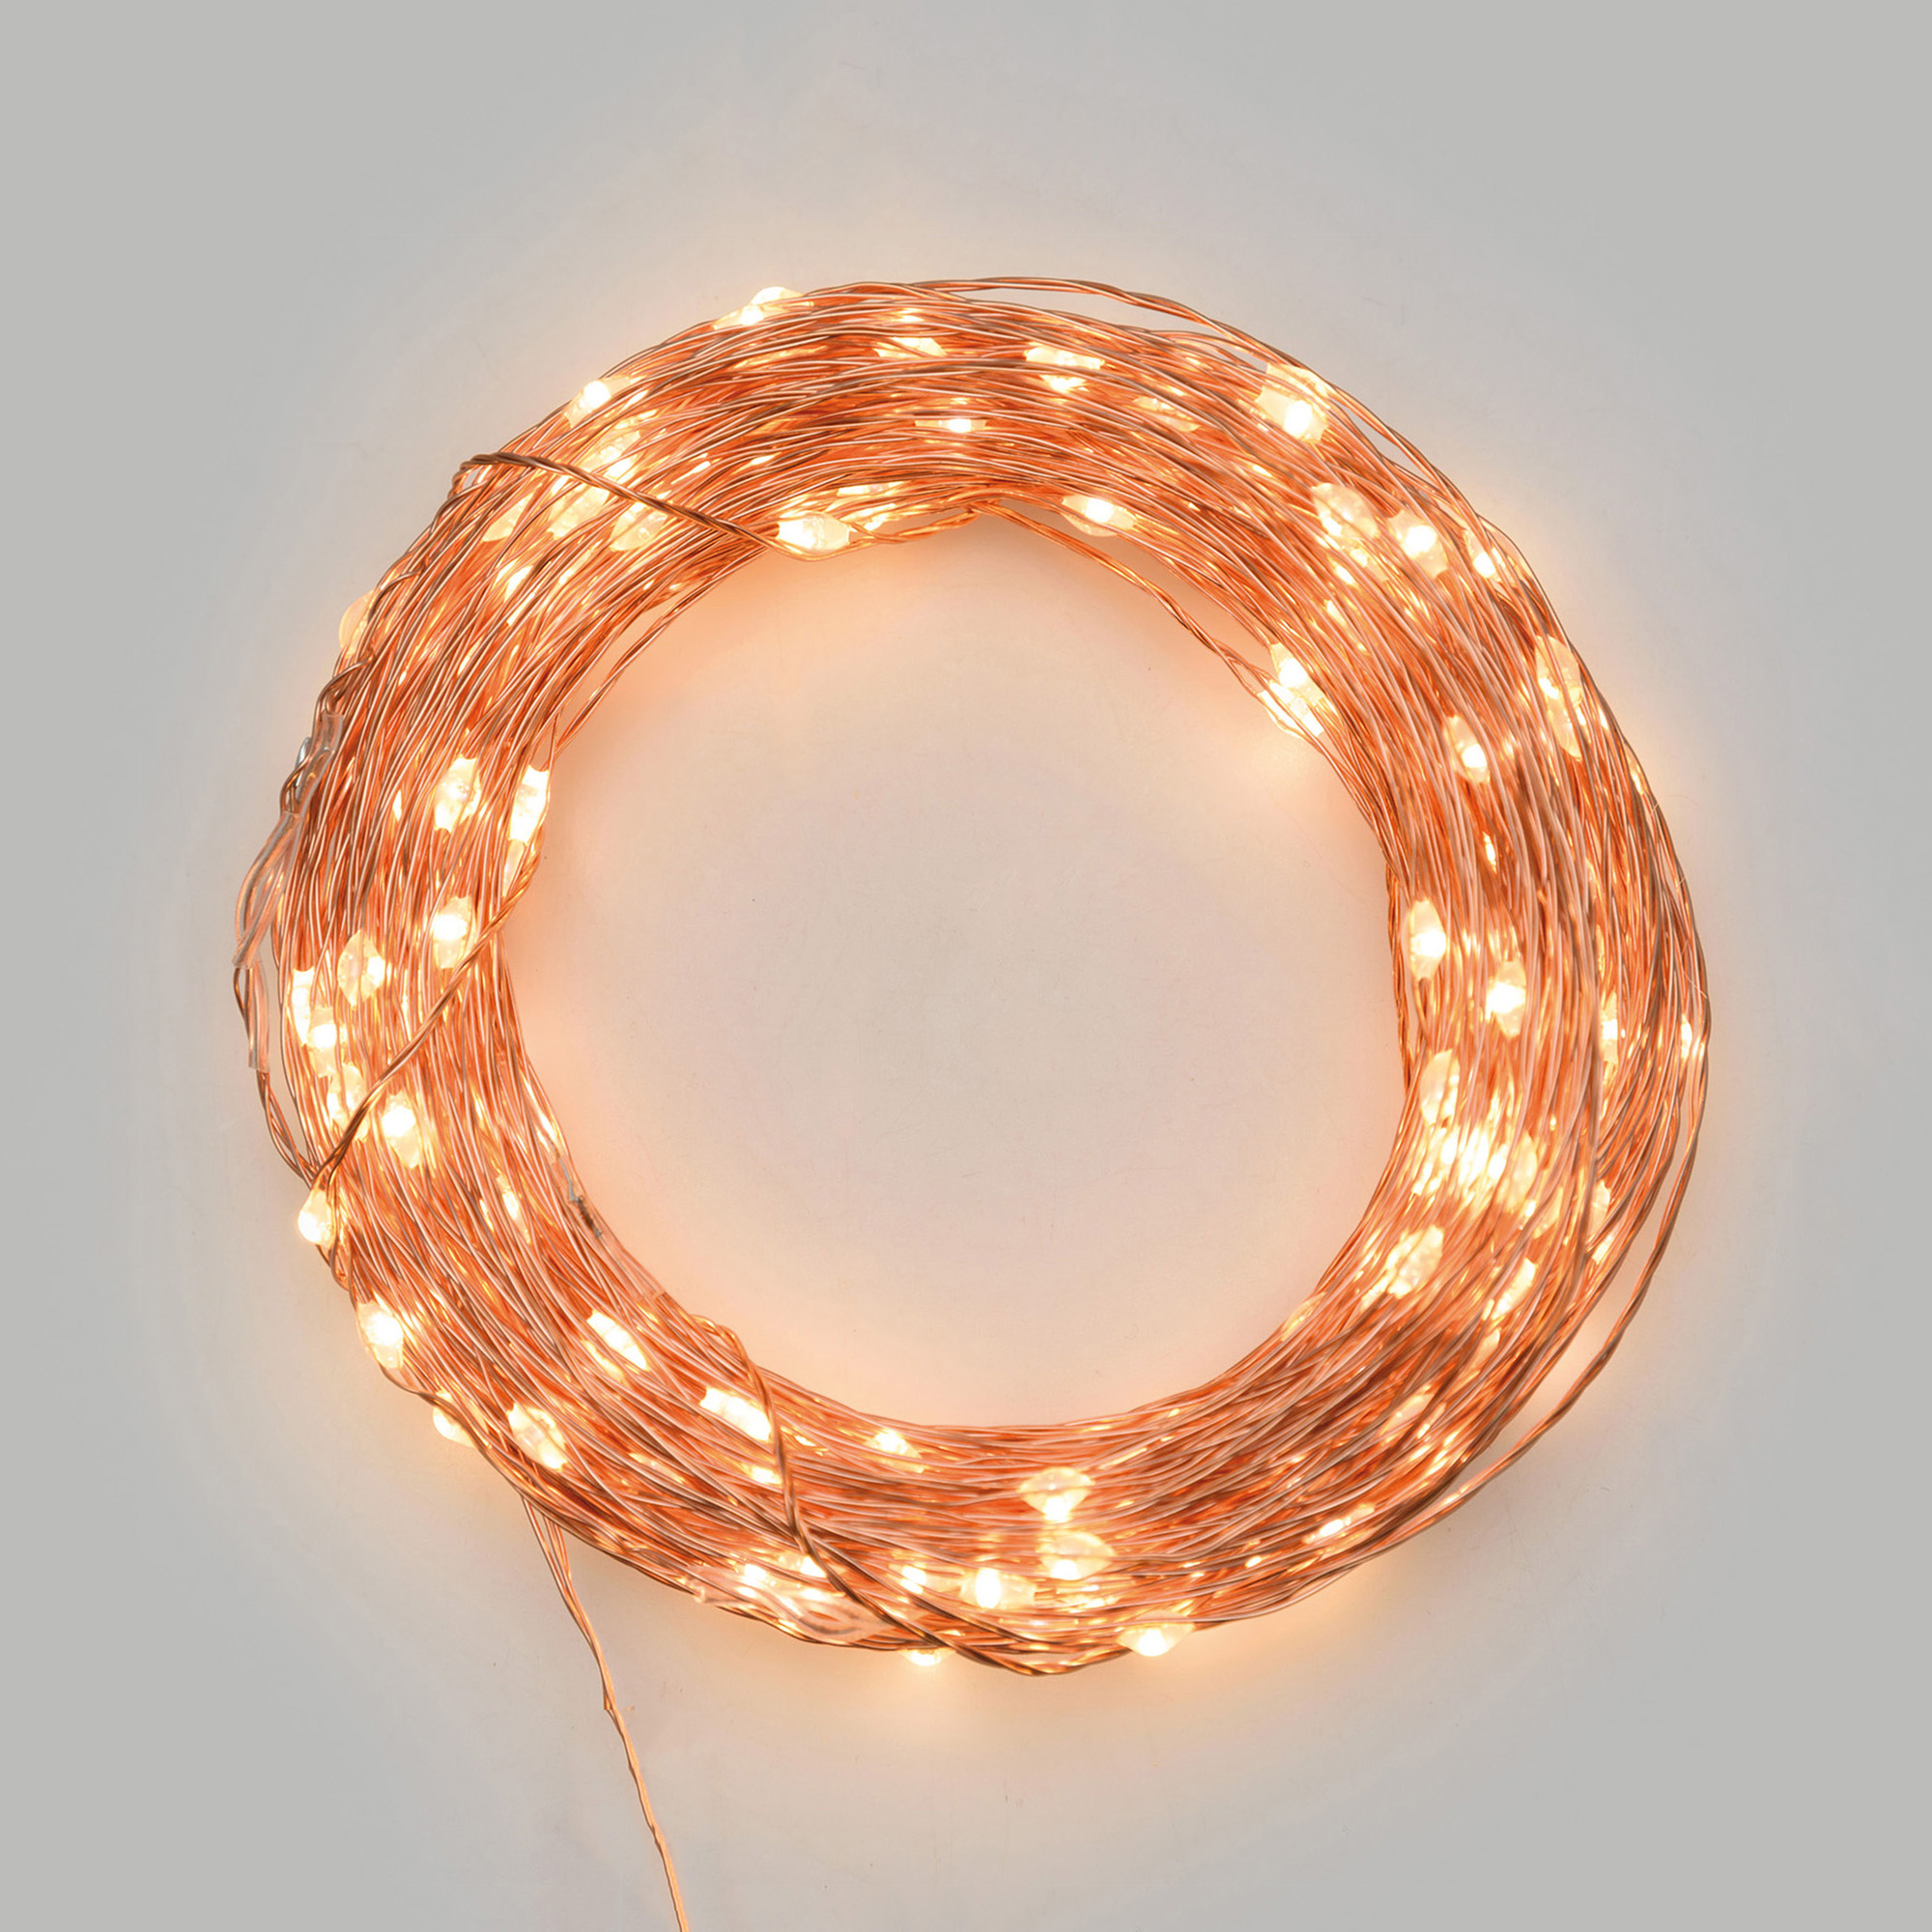 LED Micro Light Chain 200 warm white LEDs, Remote Control, 15 Functions, Battery Operated